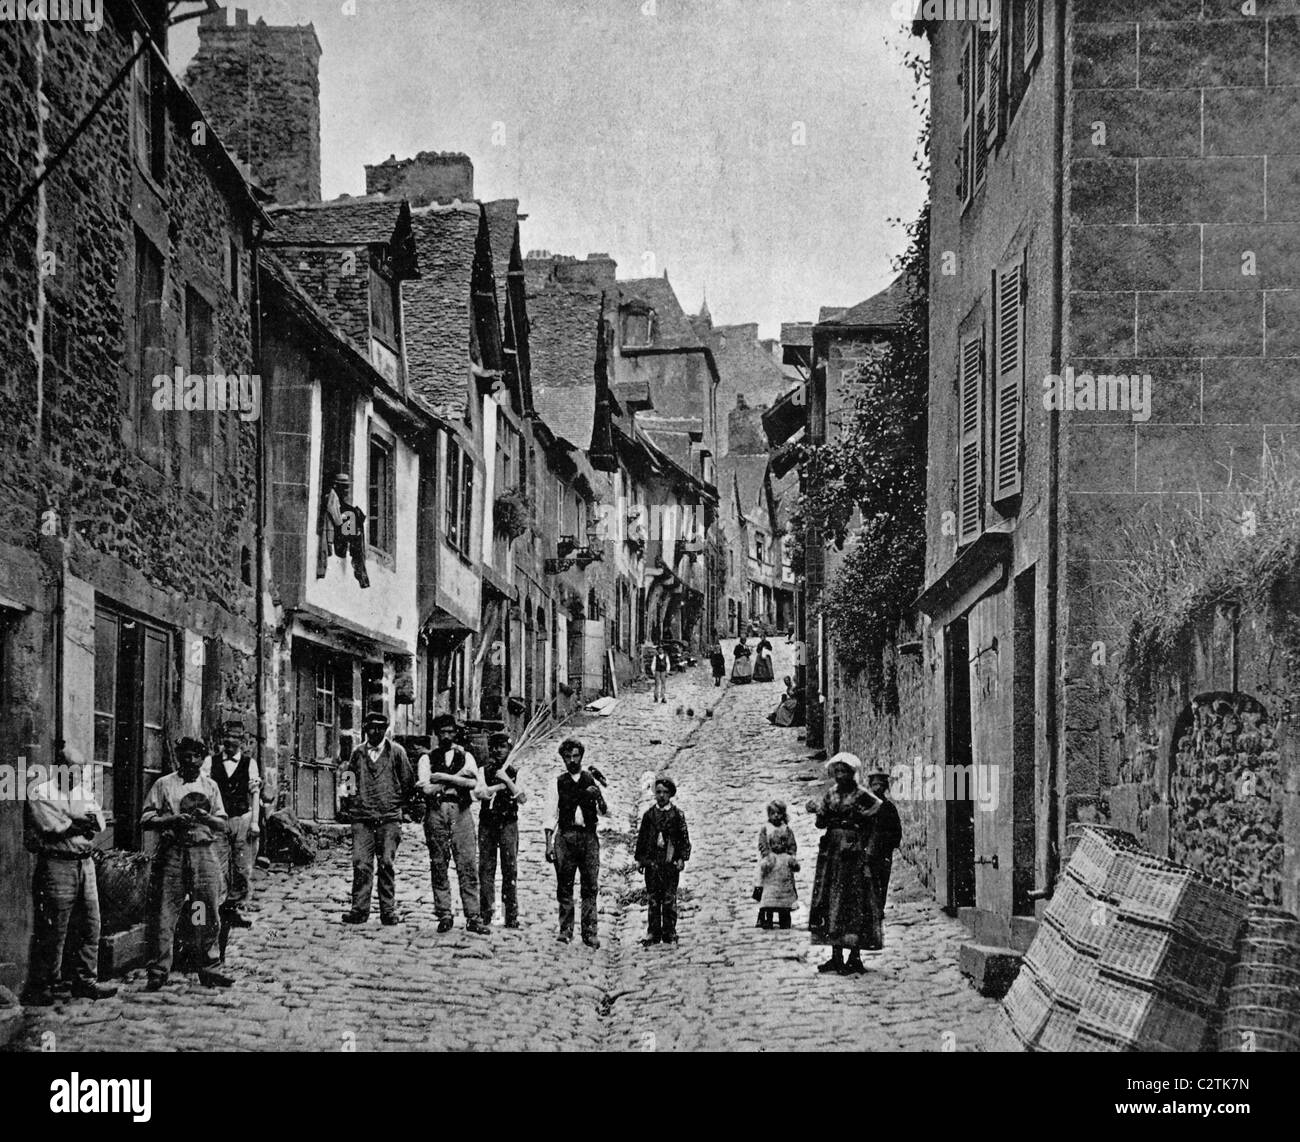 Early autotype of Dinan, Brittany, France, historical photo, 1884 Stock Photo